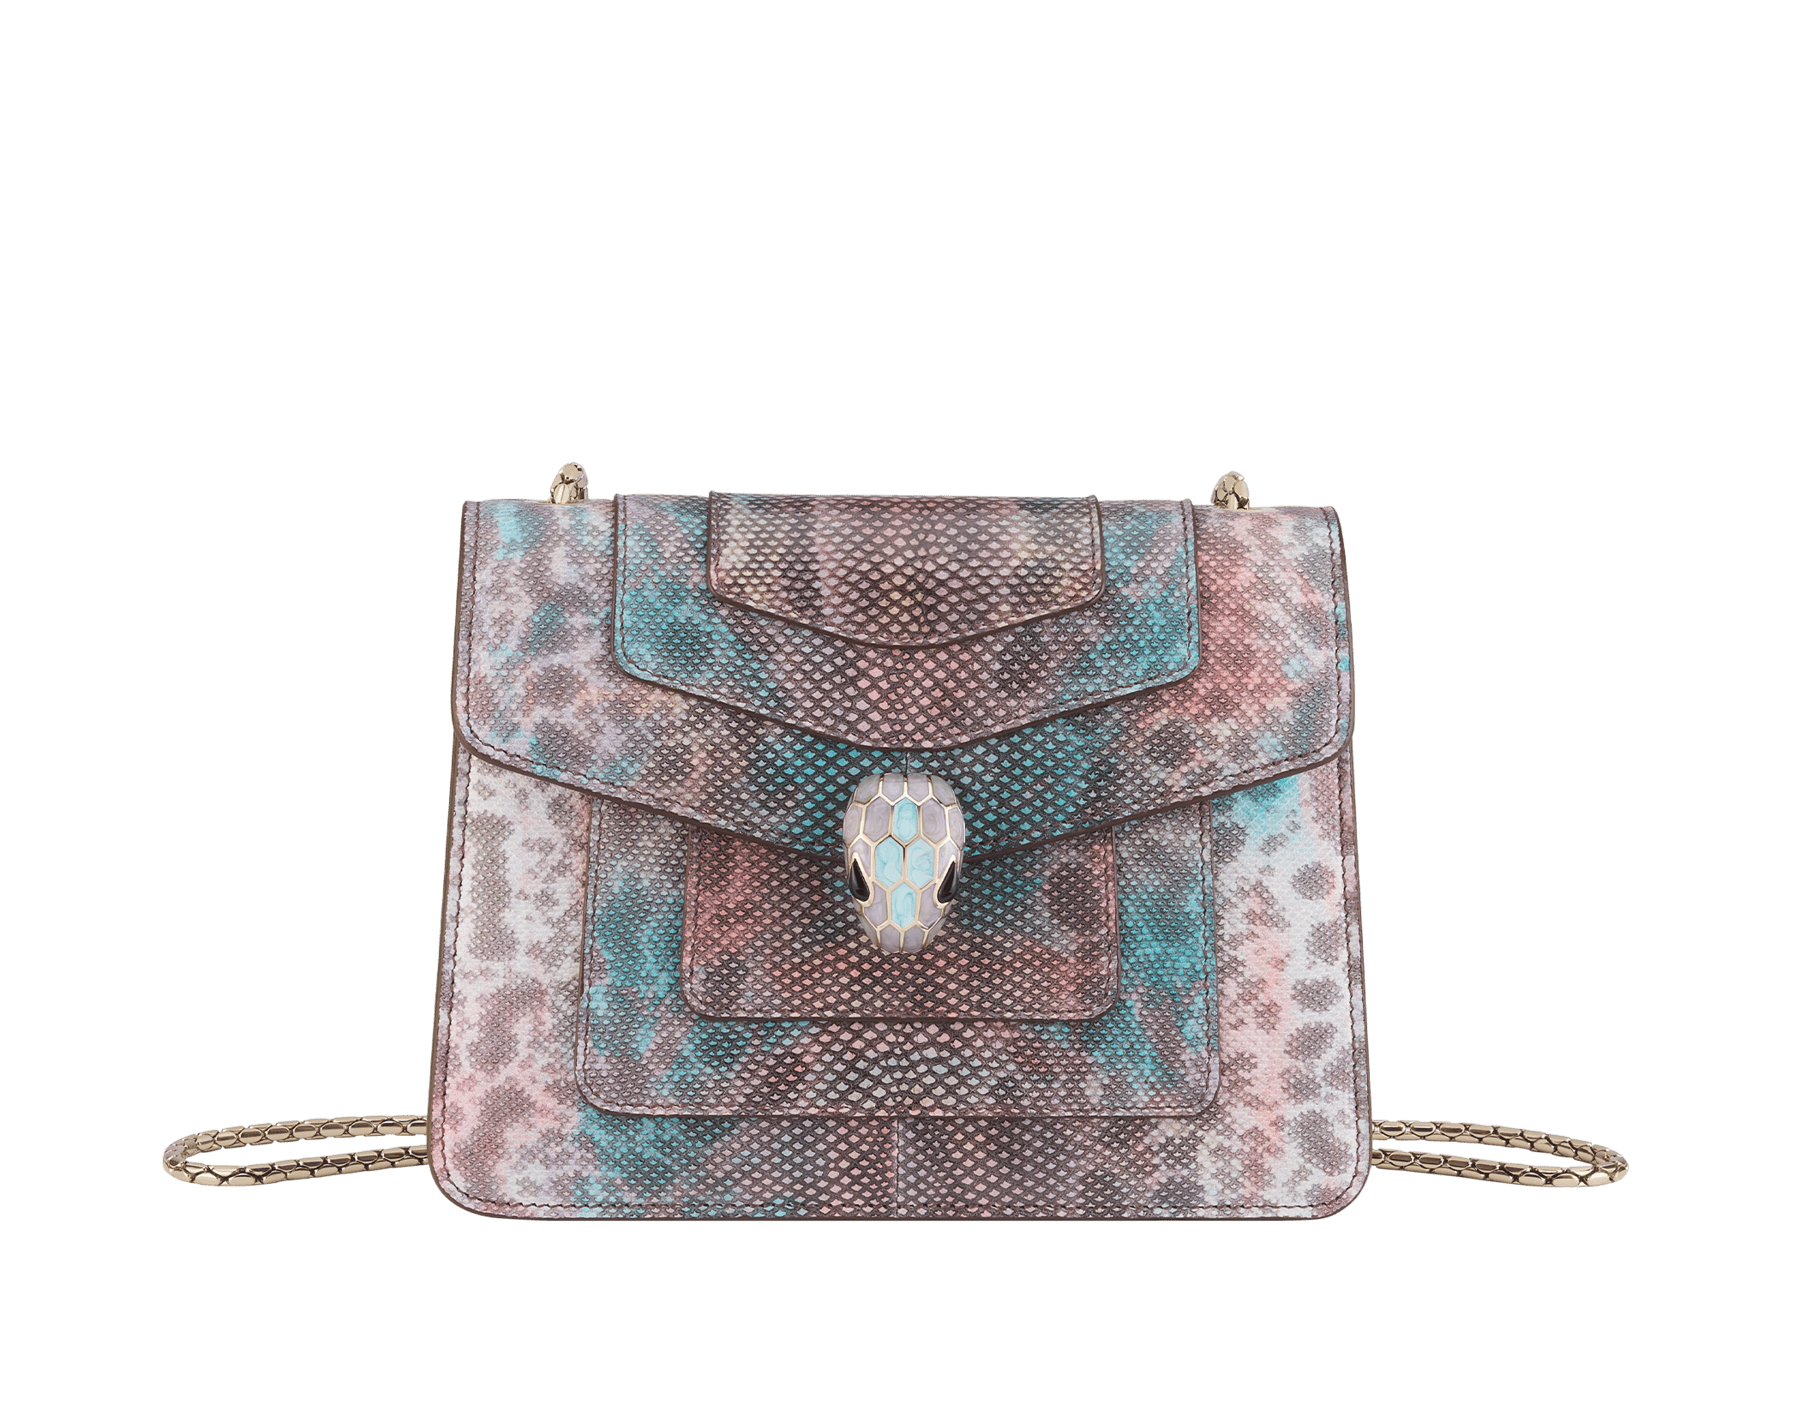 Serpenti Forever small crossbody bag in multicolored Sugarplum karung skin with watercolor opal light blue nappa leather lining. Captivating magnetic snakehead closure in light gold-plated brass embellished with purple and green enamel scales, and black onyx eyes. 292894 image 1